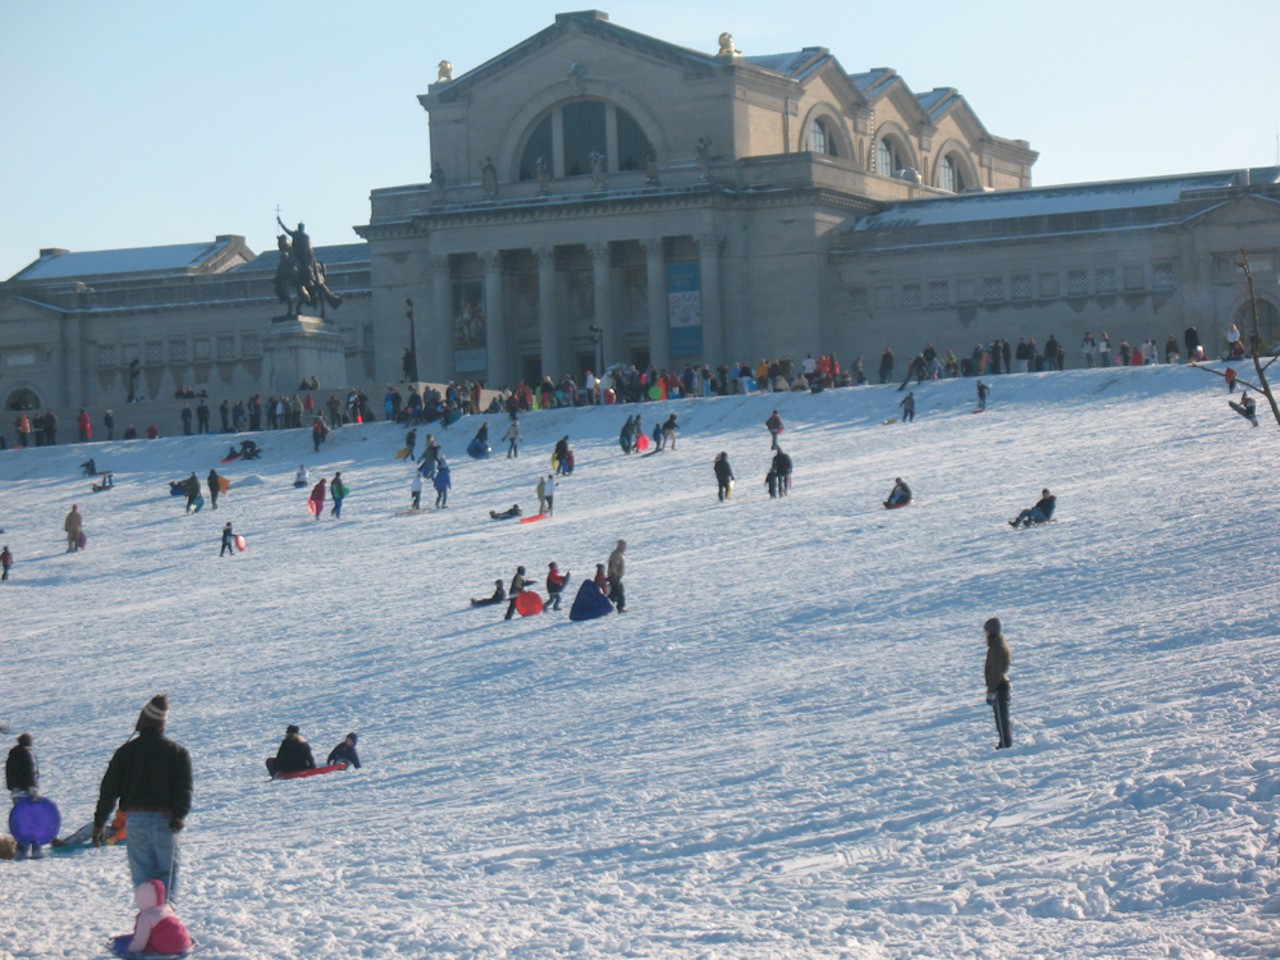 We&#146;re all raising our kids to be wimps.
Oh, there&#146;s an inch of snow outside? Take cover, it&#146;s time to cancel school! (Hey, at least it means sledding on Art Hill.) Photo courtesy of Flickr / henskechristine.